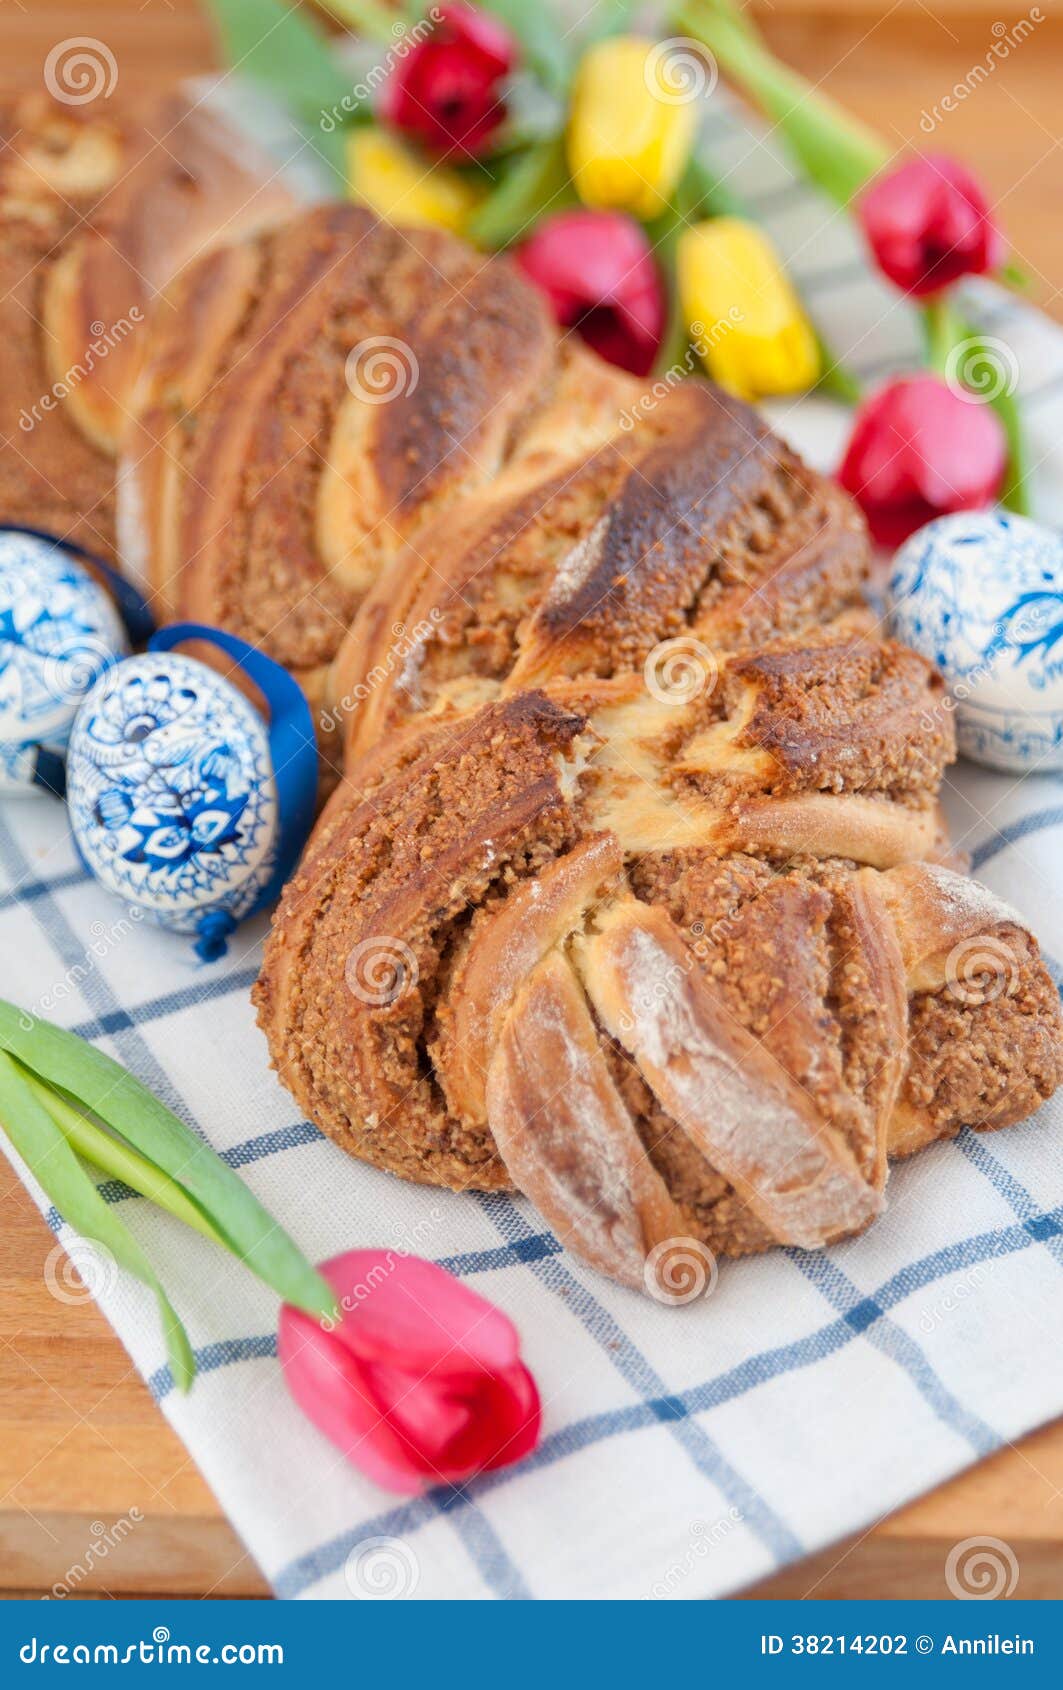 Sweet Braided German Easter Bread Stock Photo - Image of ...